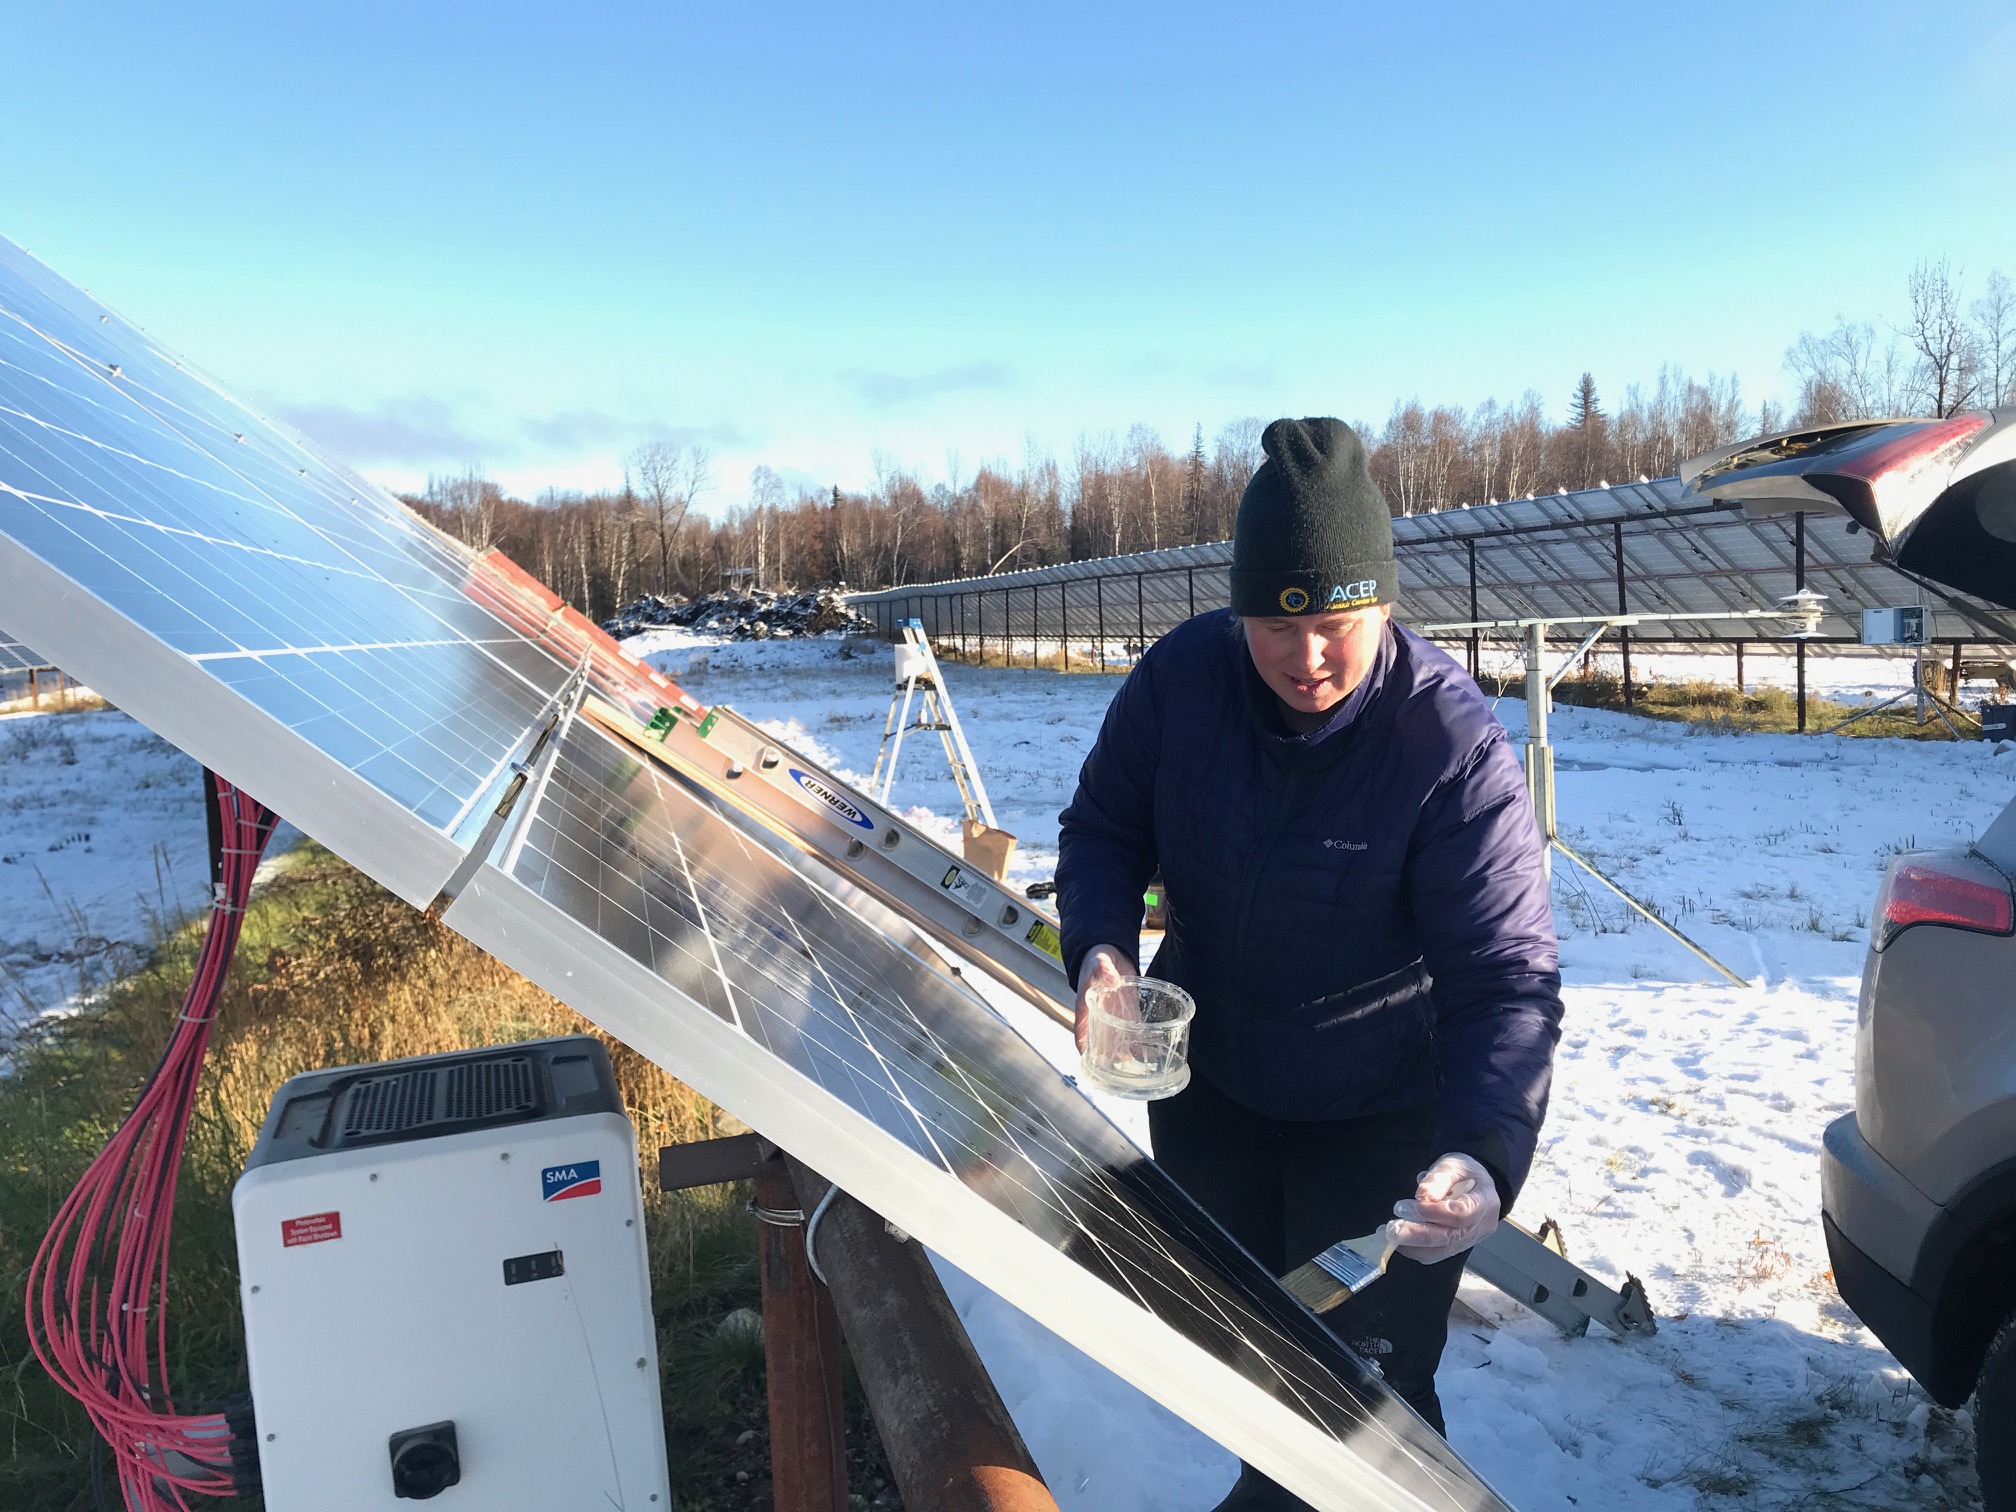 A man brushing a compound on solar panels to assist in snow shedding